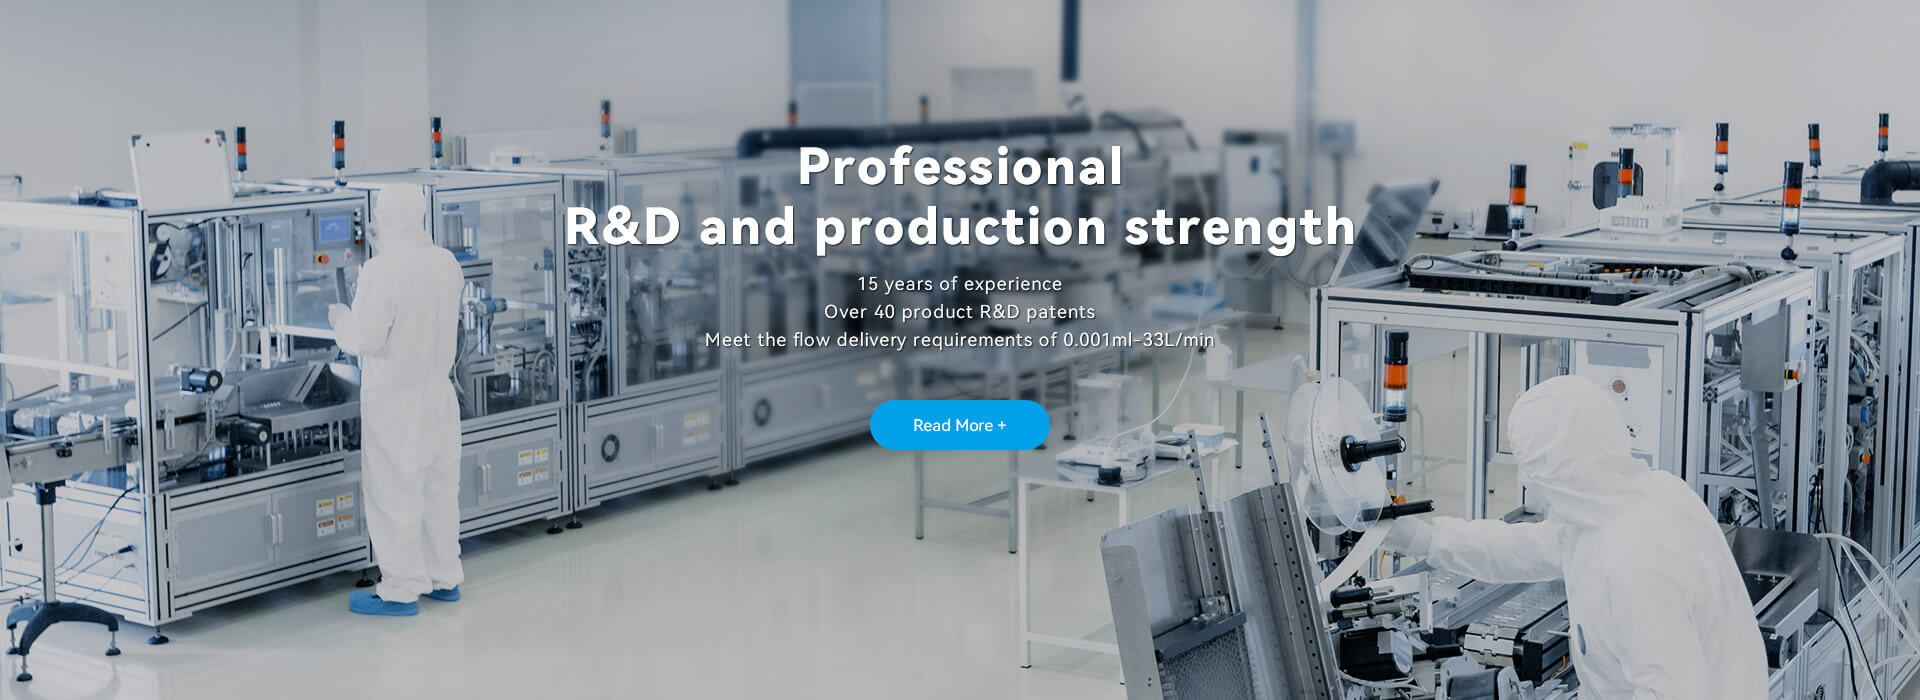 Professional R&D and production strength